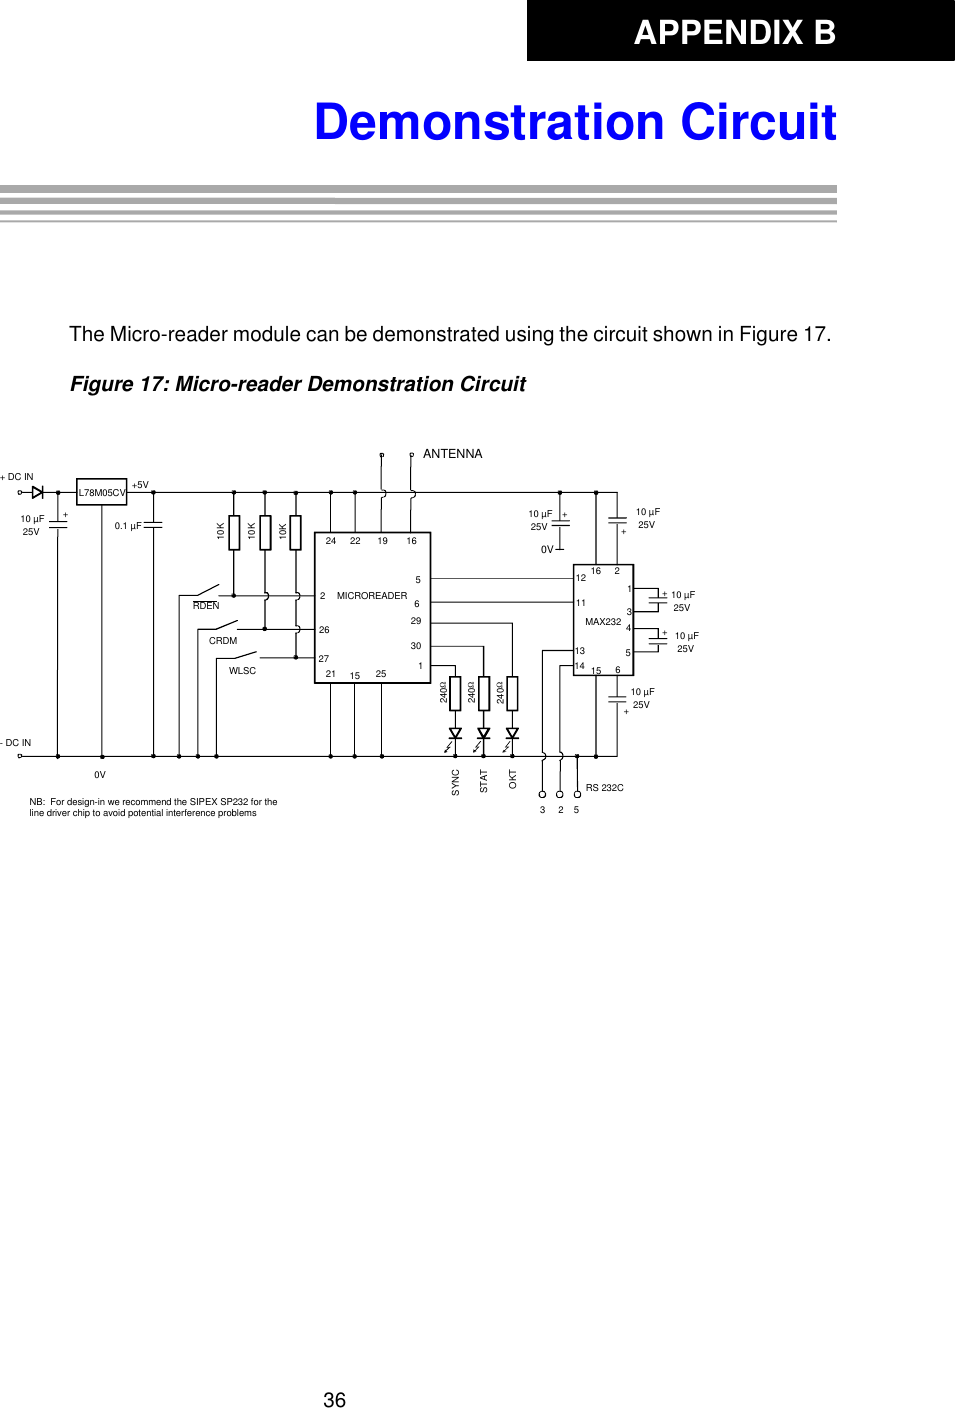 APPENDIX B36Demonstration CircuitAppendix B: Demonstration CircuitThe Micro-reader module can be demonstrated using the circuit shown in Figure 17. Figure 17: Micro-reader Demonstration CircuitL78M05CV24 22 19 16ANTENNAMICROREADER +++6151413+121116 21345+RS 232C+5V0.1 µF10 µF 25V10 µF 25V10 µF 25V10 µF 25V10 µF 25V10 µF 25V240Ω240Ω240ΩSYNCSTATOKT562930121 15 252262710K10K10KRDENCRDMWLSCMAX2323     2    50V+ DC IN- DC INNB:  For design-in we recommend the SIPEX SP232 for the line driver chip to avoid potential interference problems+0V